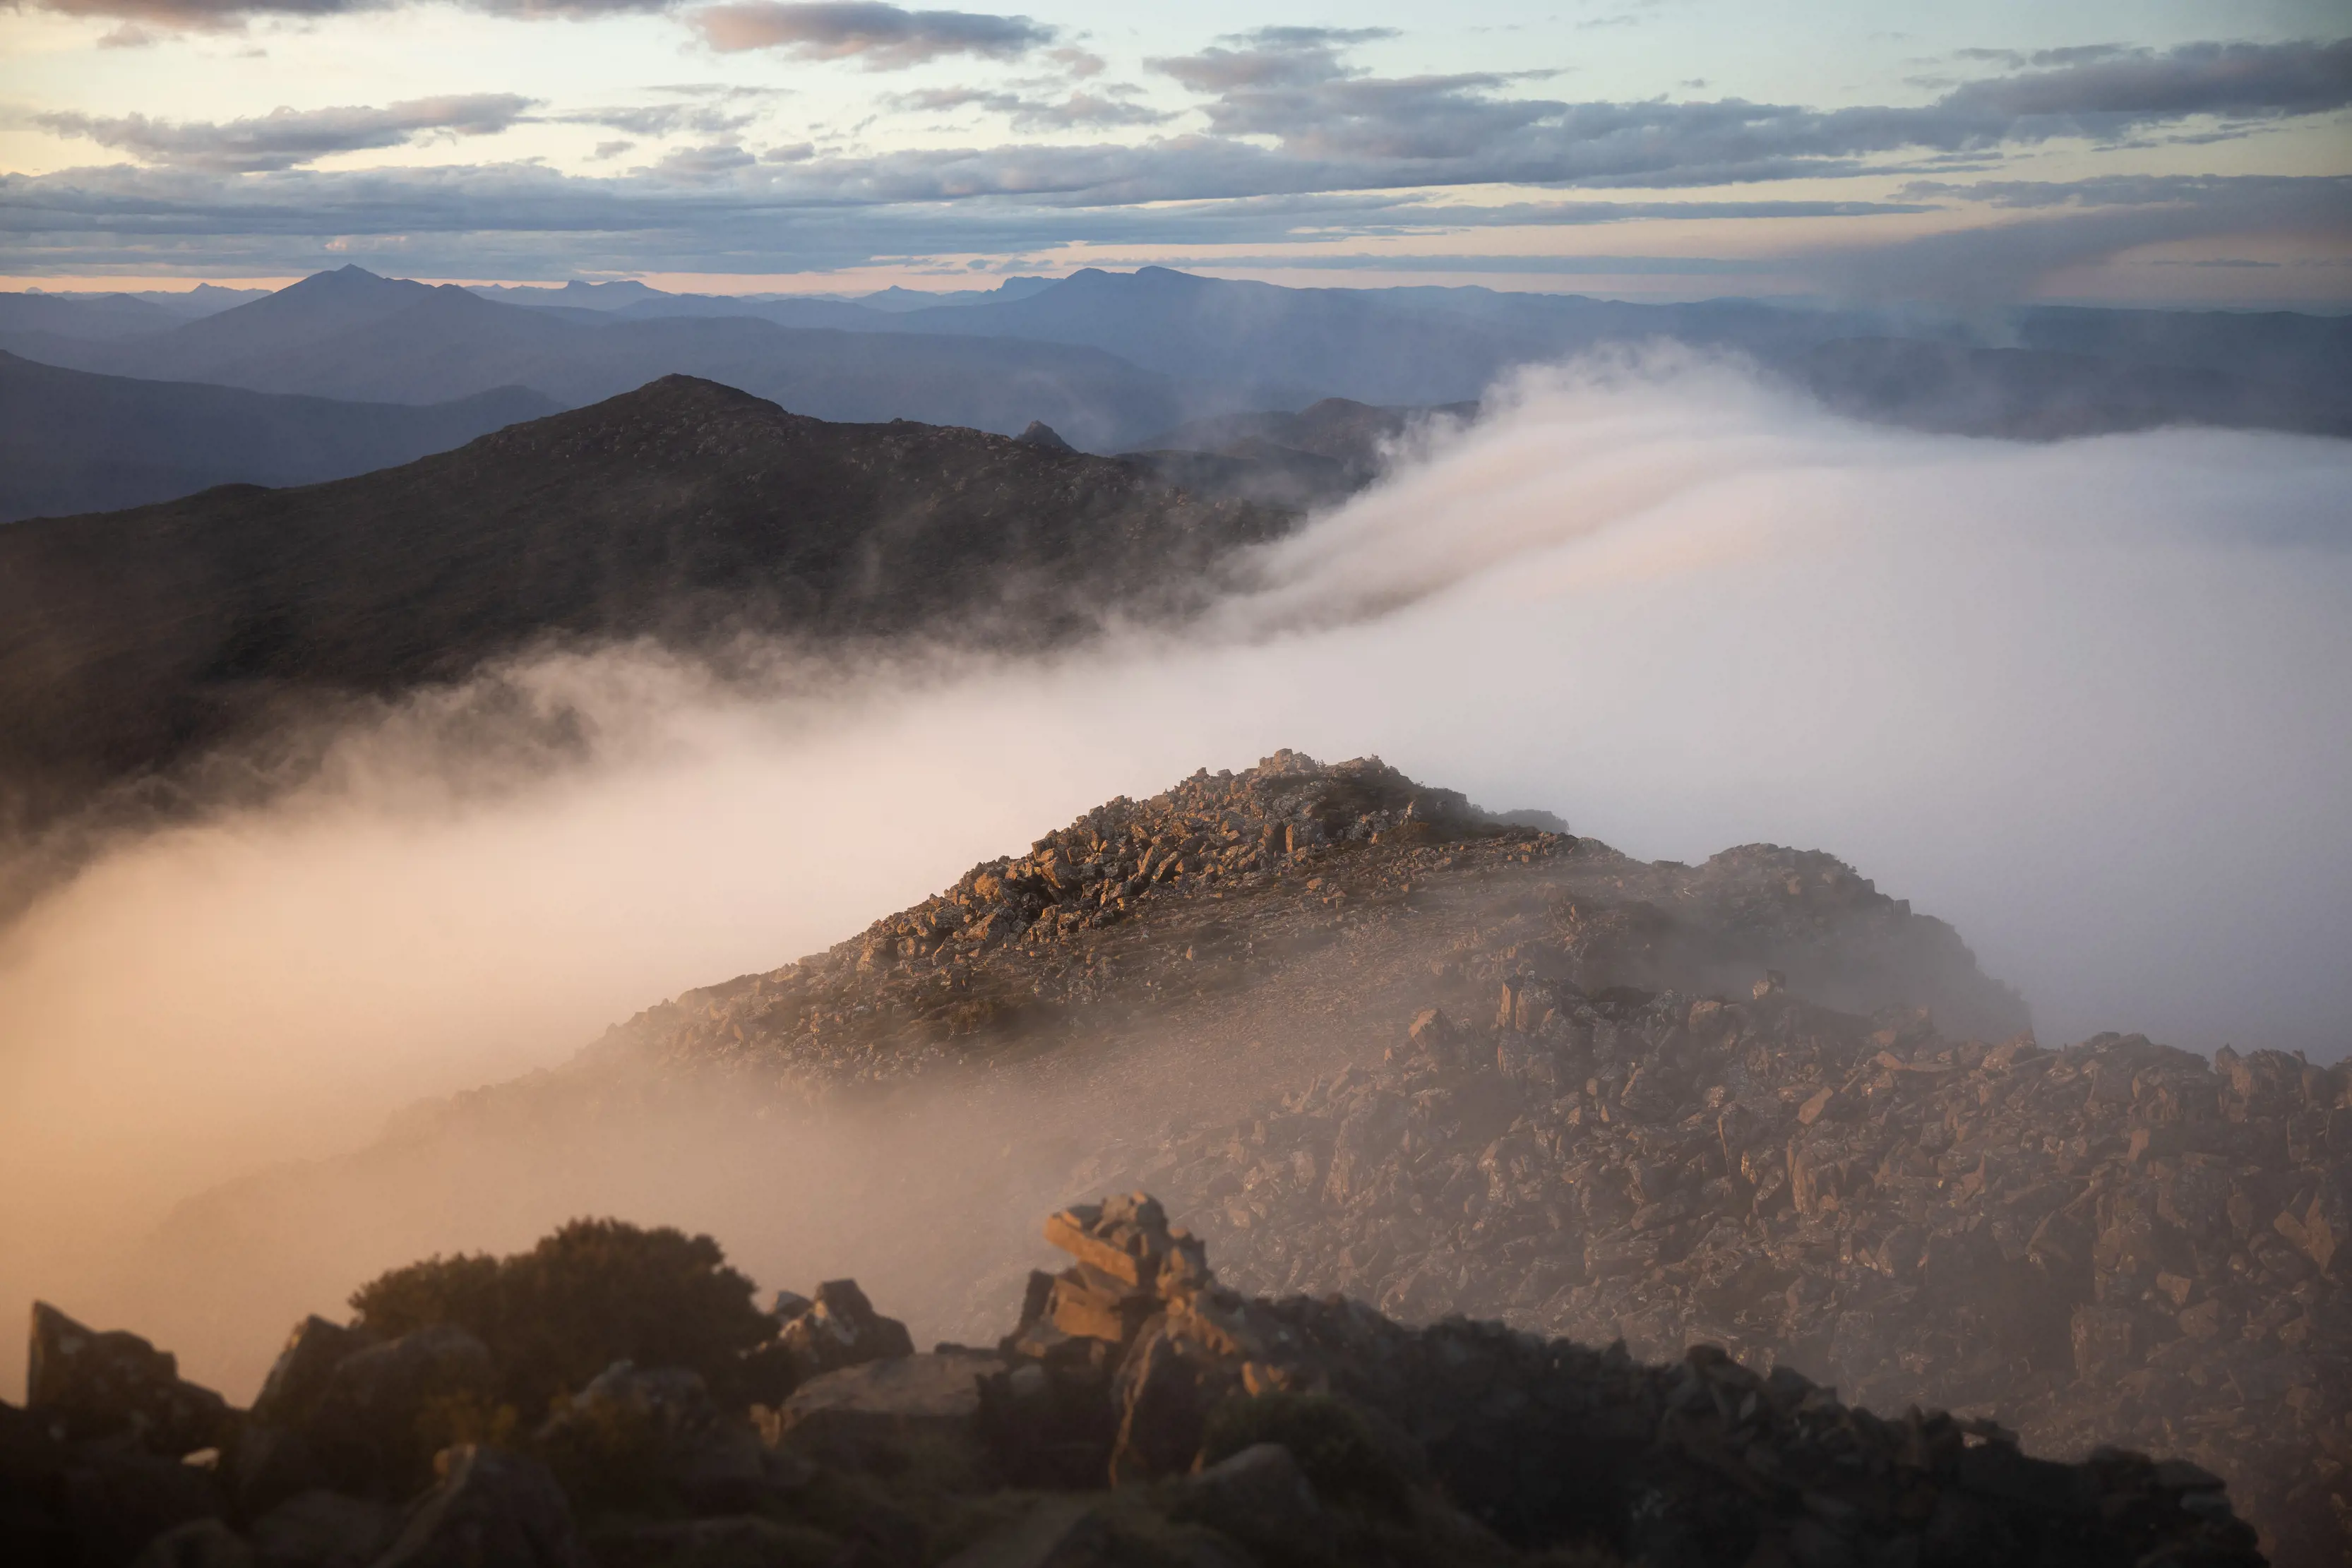 Incredible image of clouds rolling off the mountains during a vibrant sunrise at the Hartz Mountains National Park.